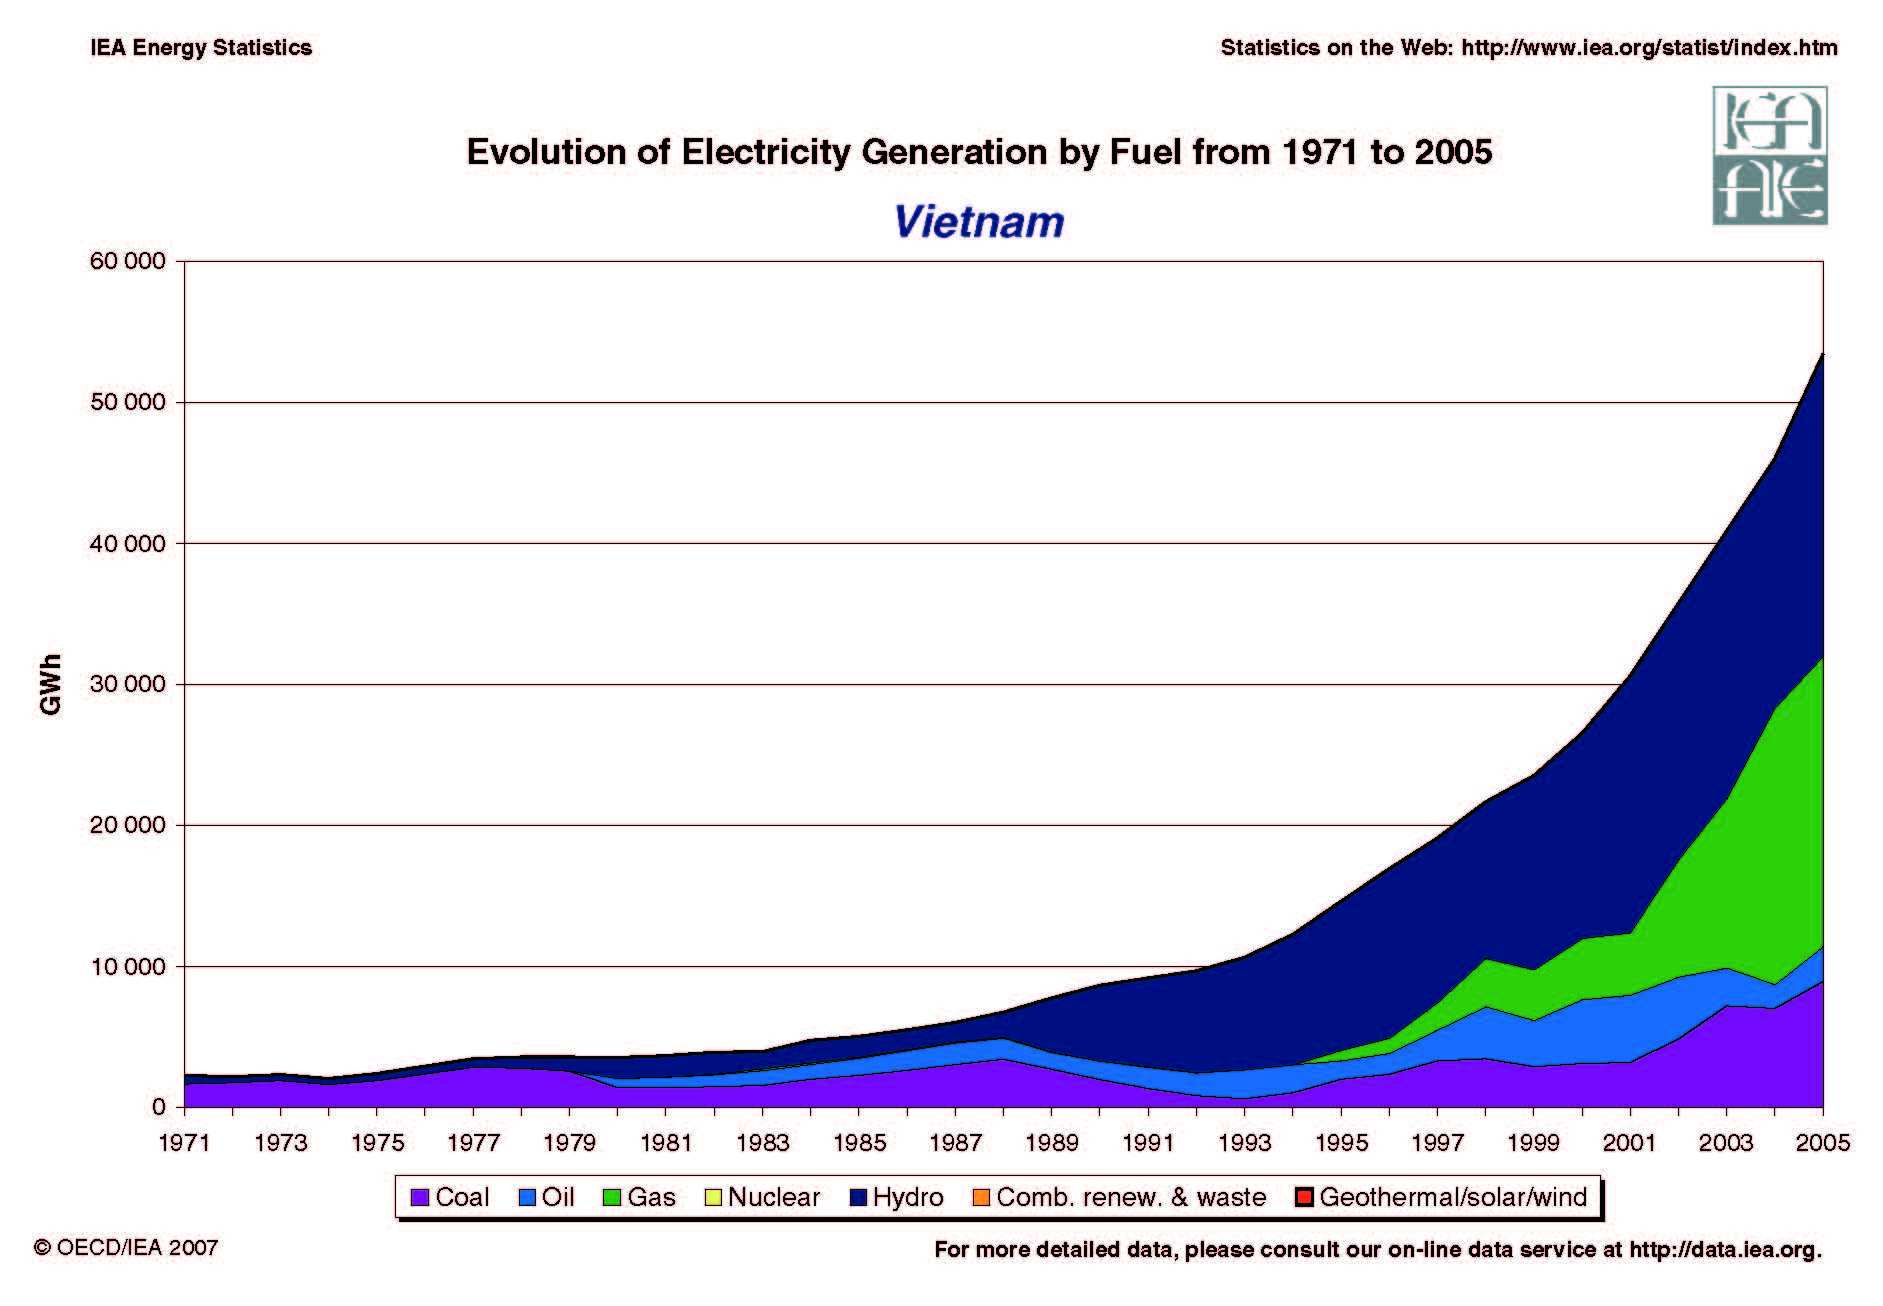 Vietnam Evolution of Electricity Generation by Fuel 1971 - 2005